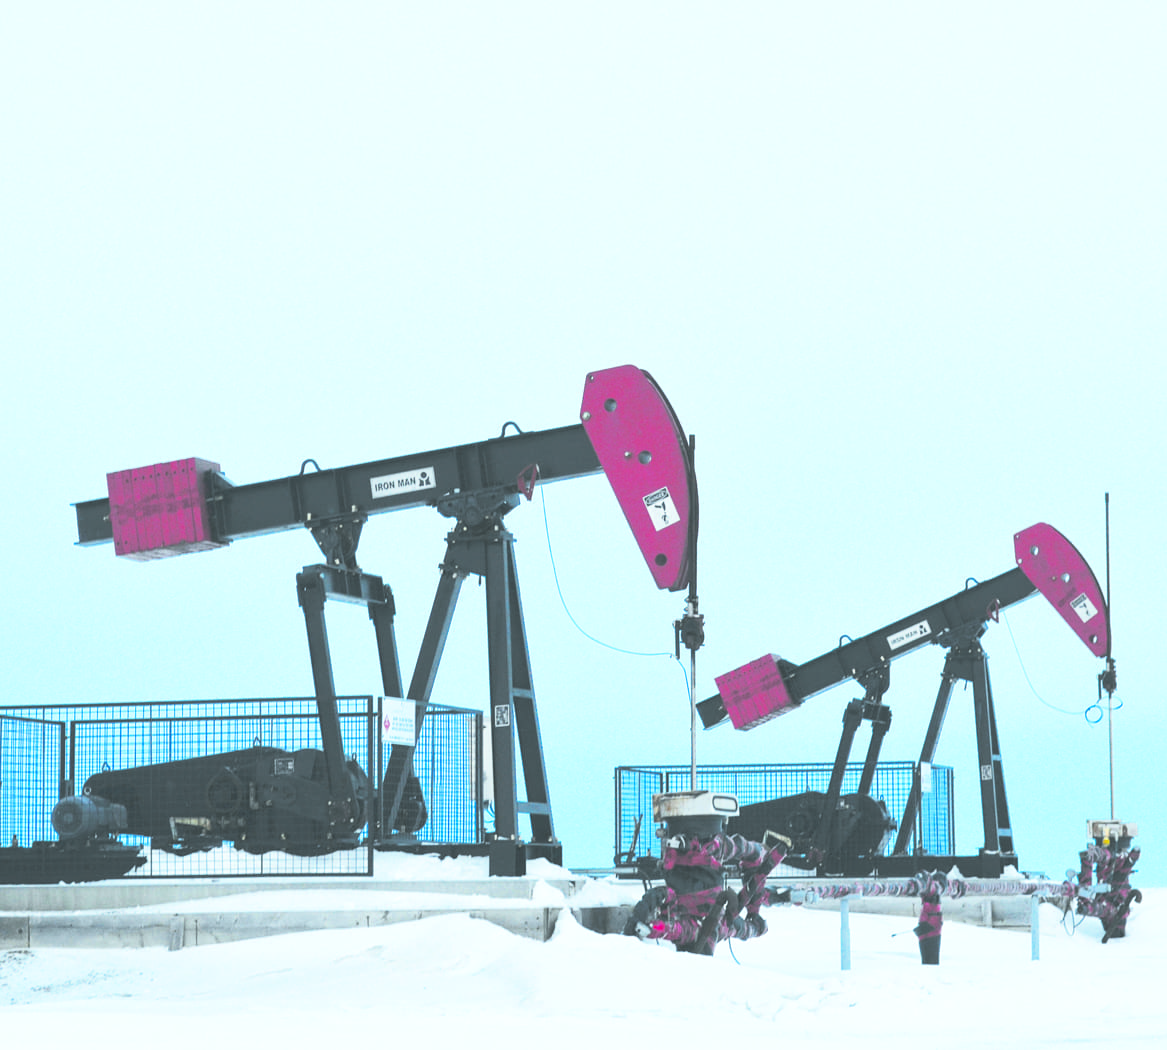 December oil and gas rights sale generates more than $9.5 million